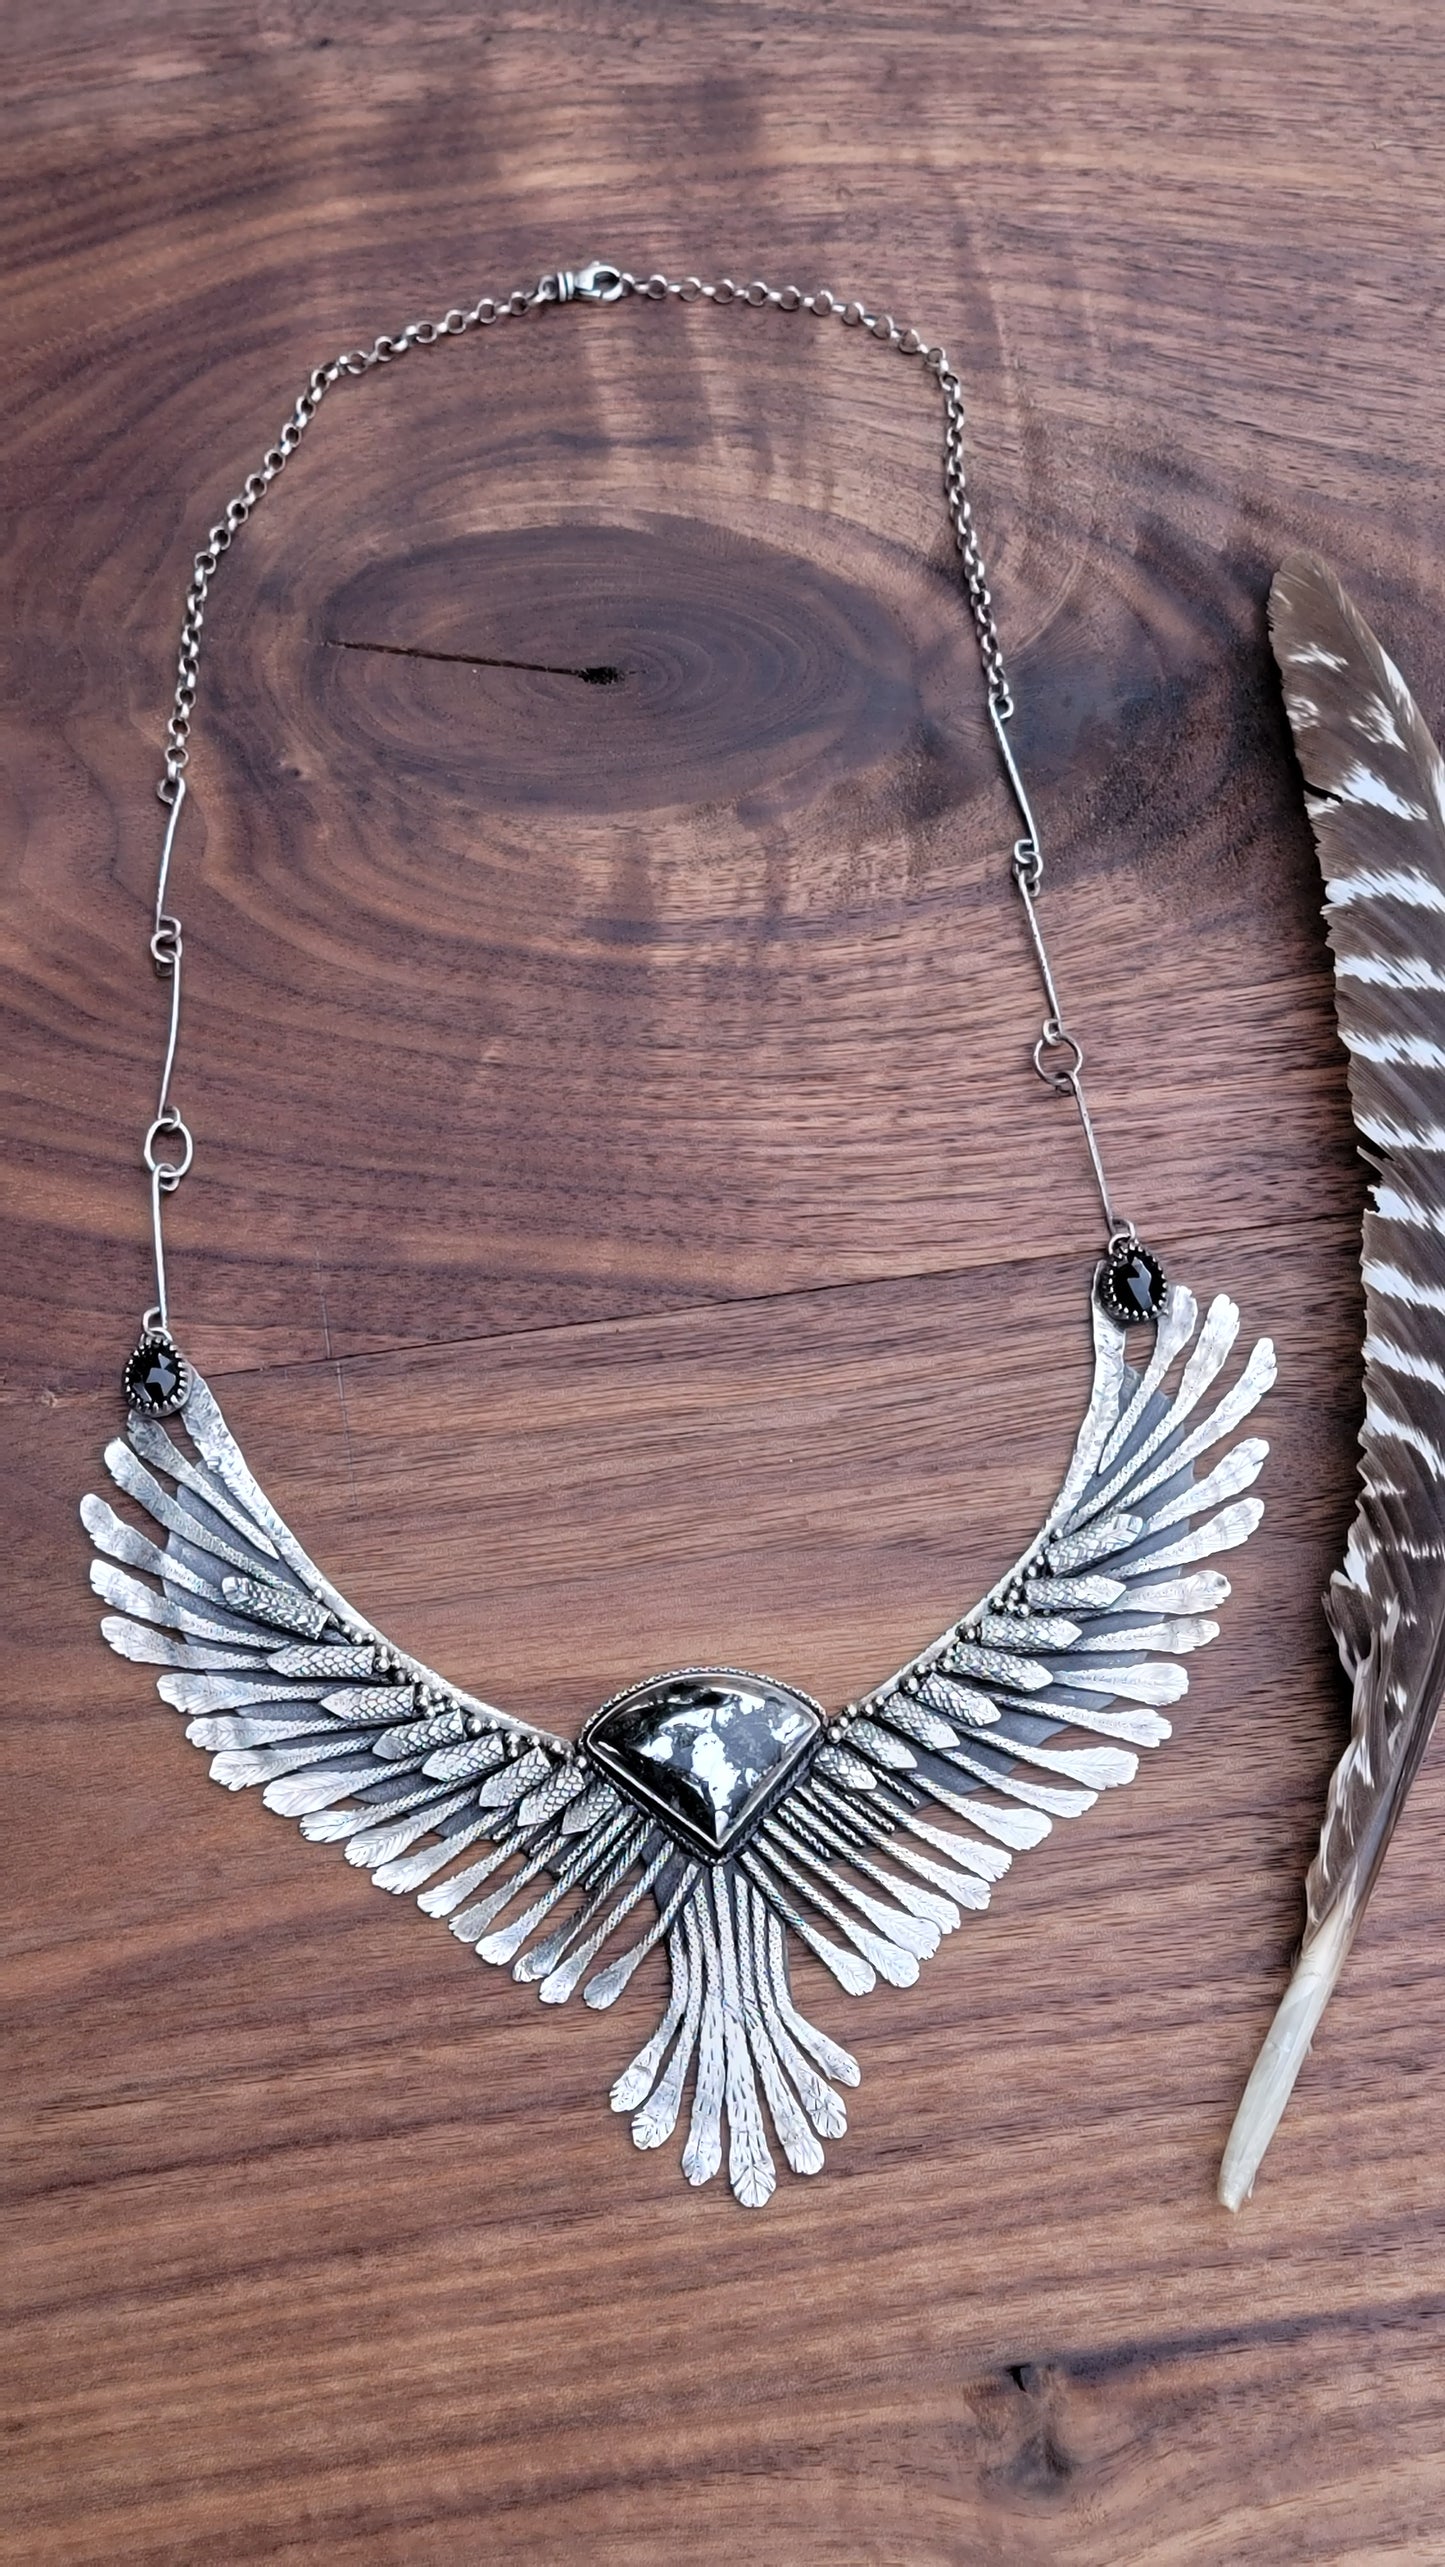 XX//The SUPERB OWL:::NIGHT FLIGHT Statement Necklace - Handcrafted with Apache Gold in Fine and Sterling Silver